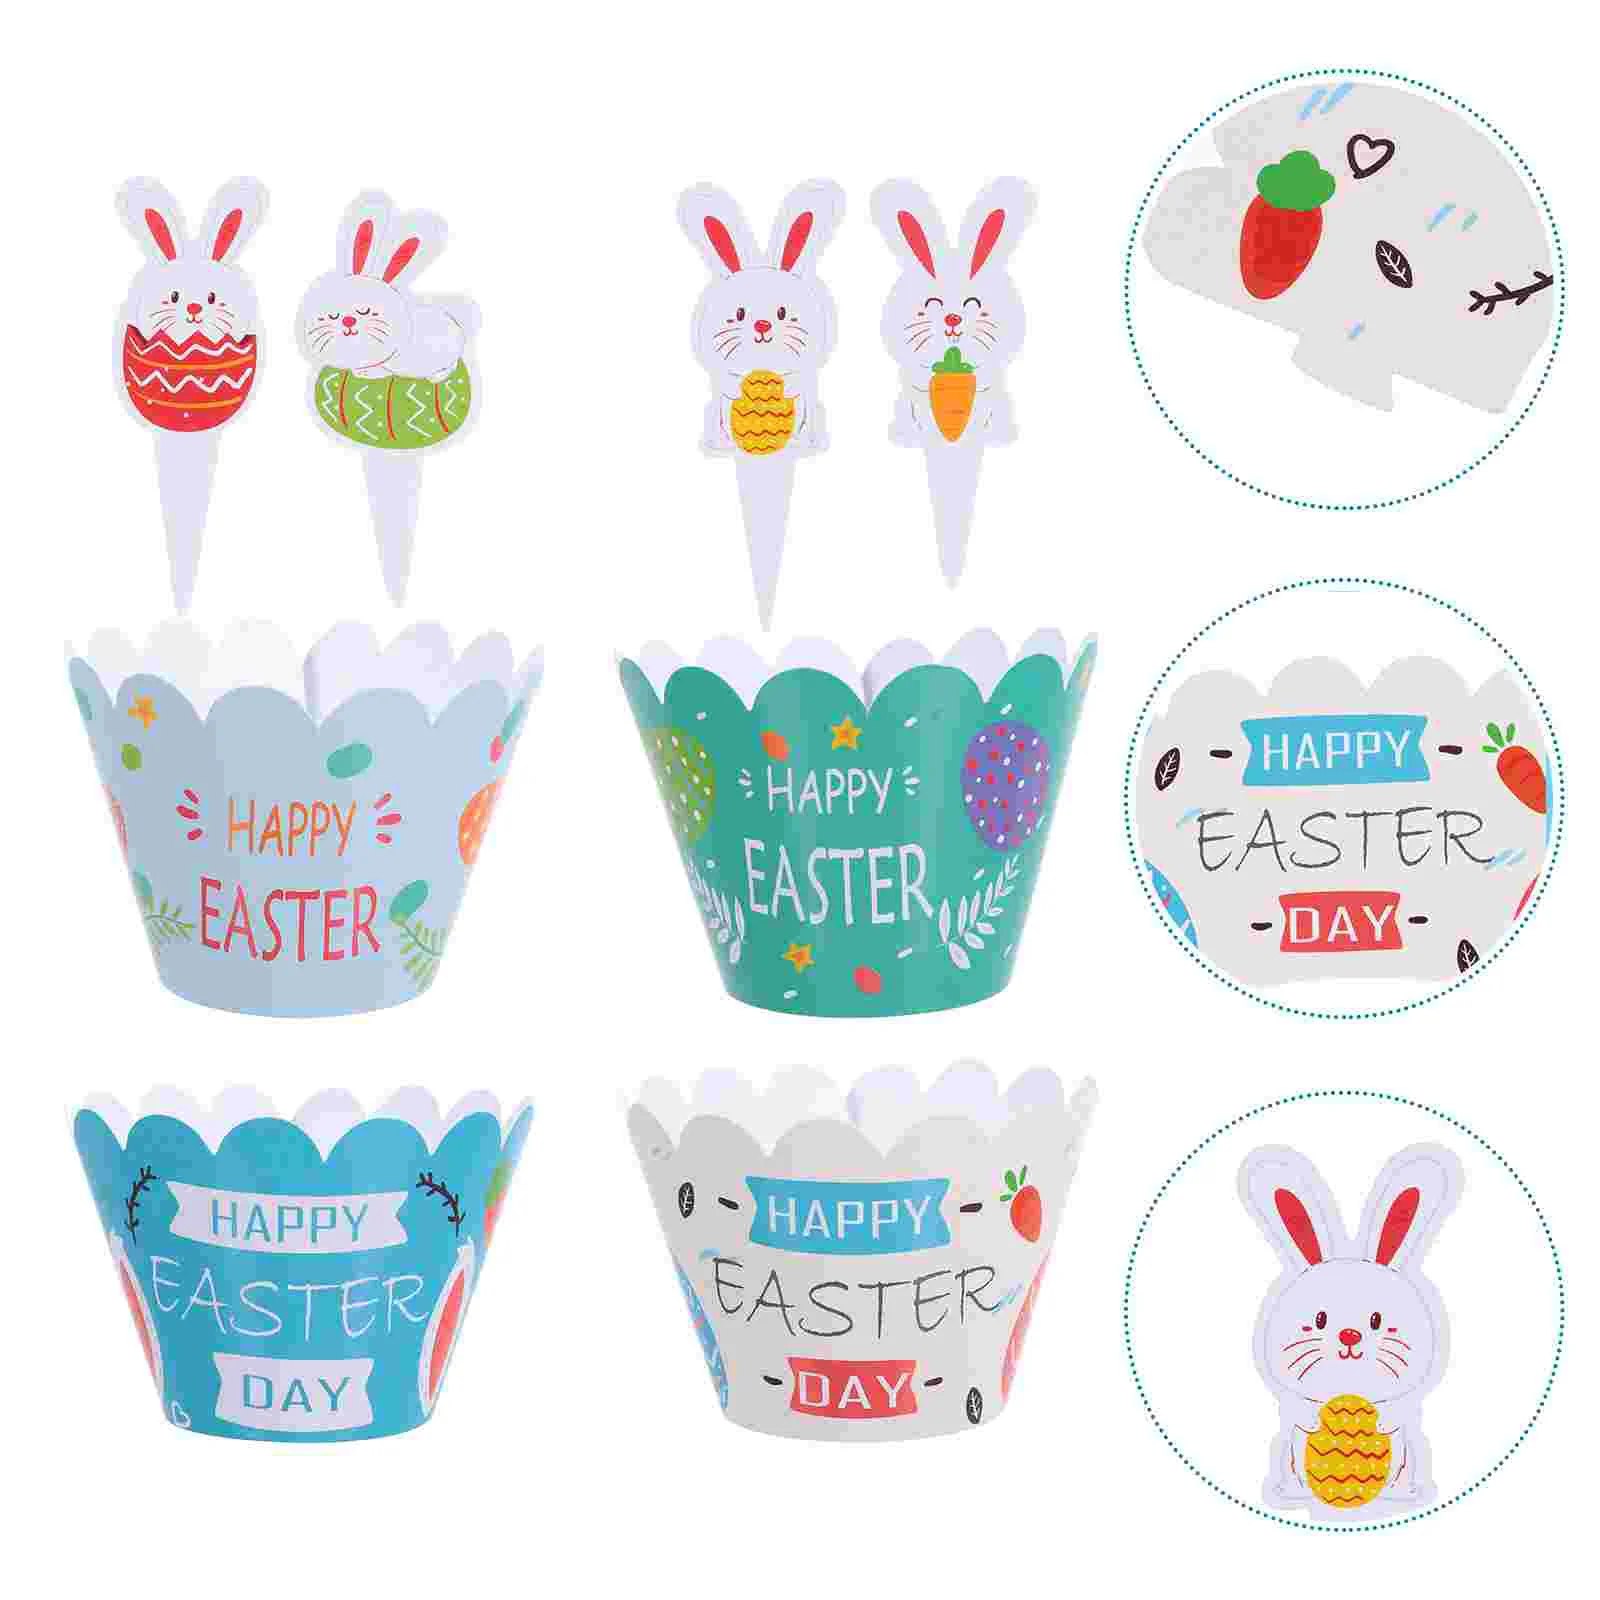 

Cupcake Easter Bunny Wrappers Cake Cute Topper Wrapper Supplies Party Wraps Chicken Case Muffin Animal Decor Toppers Cups Rabbit